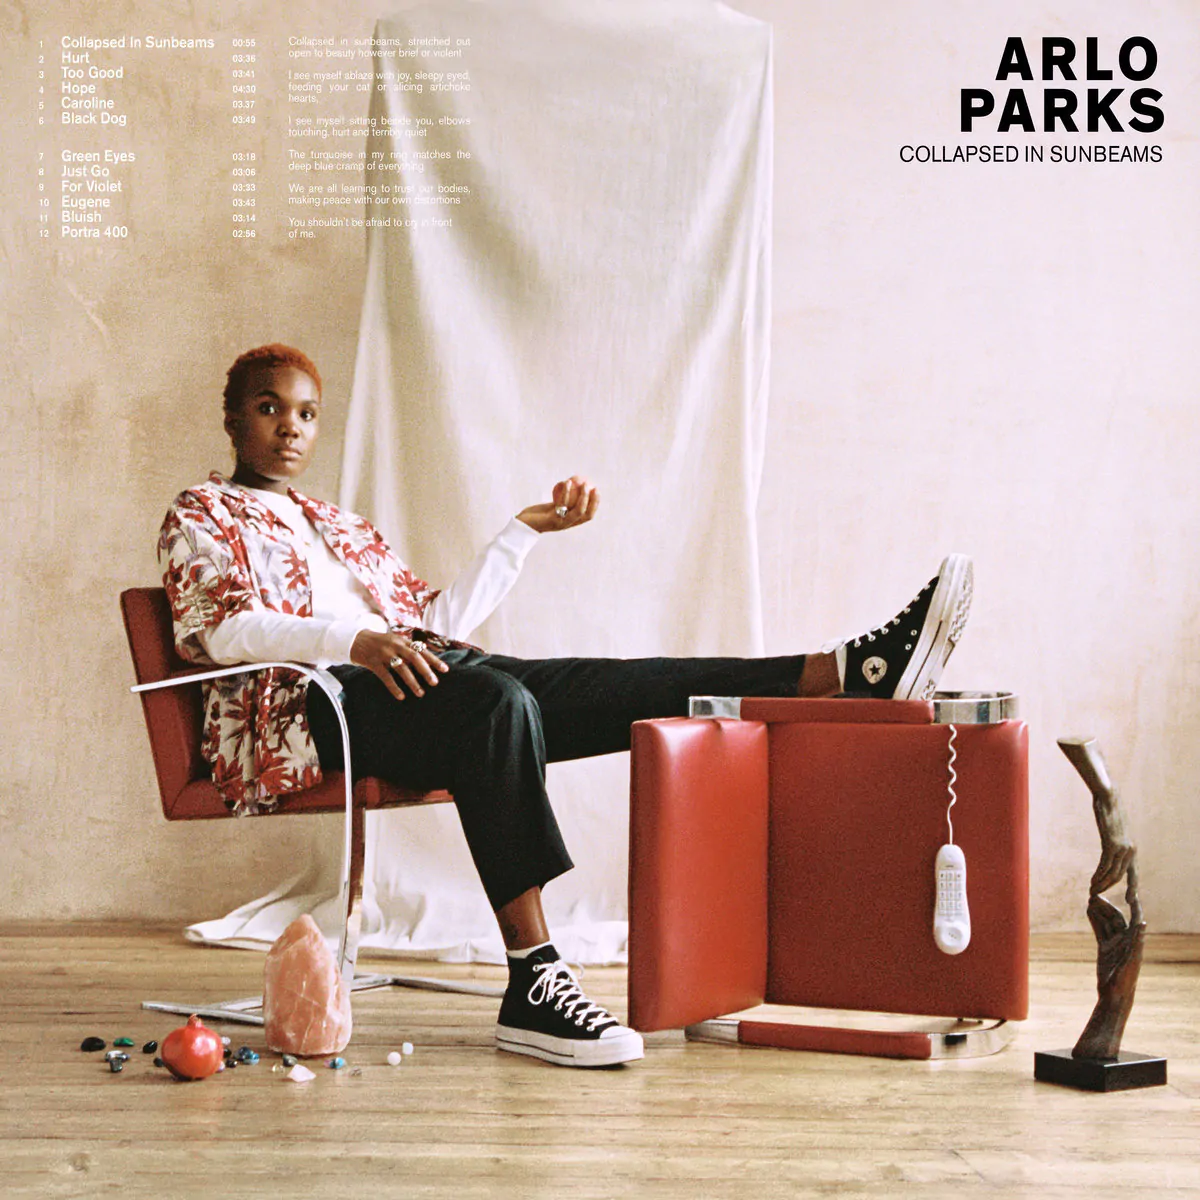 ALBUM REVIEW: Arlo Parks – Collapsed in Sunbeams